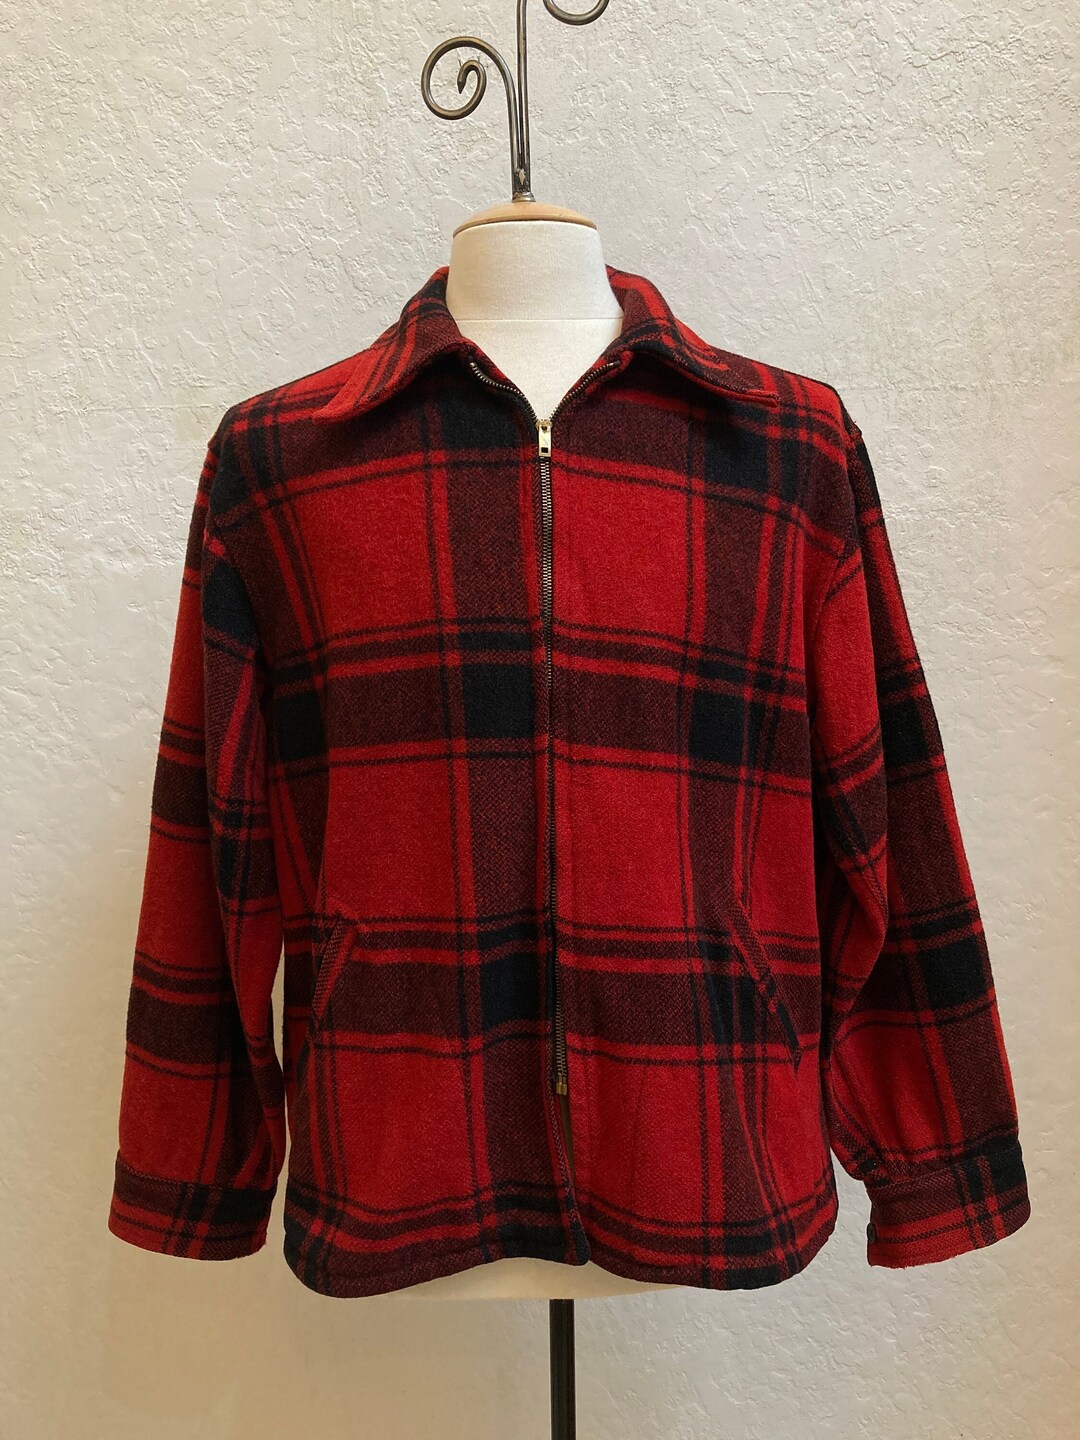 1950s campus Mens Jacket in Red and Black Plaid Wool / Men's ...